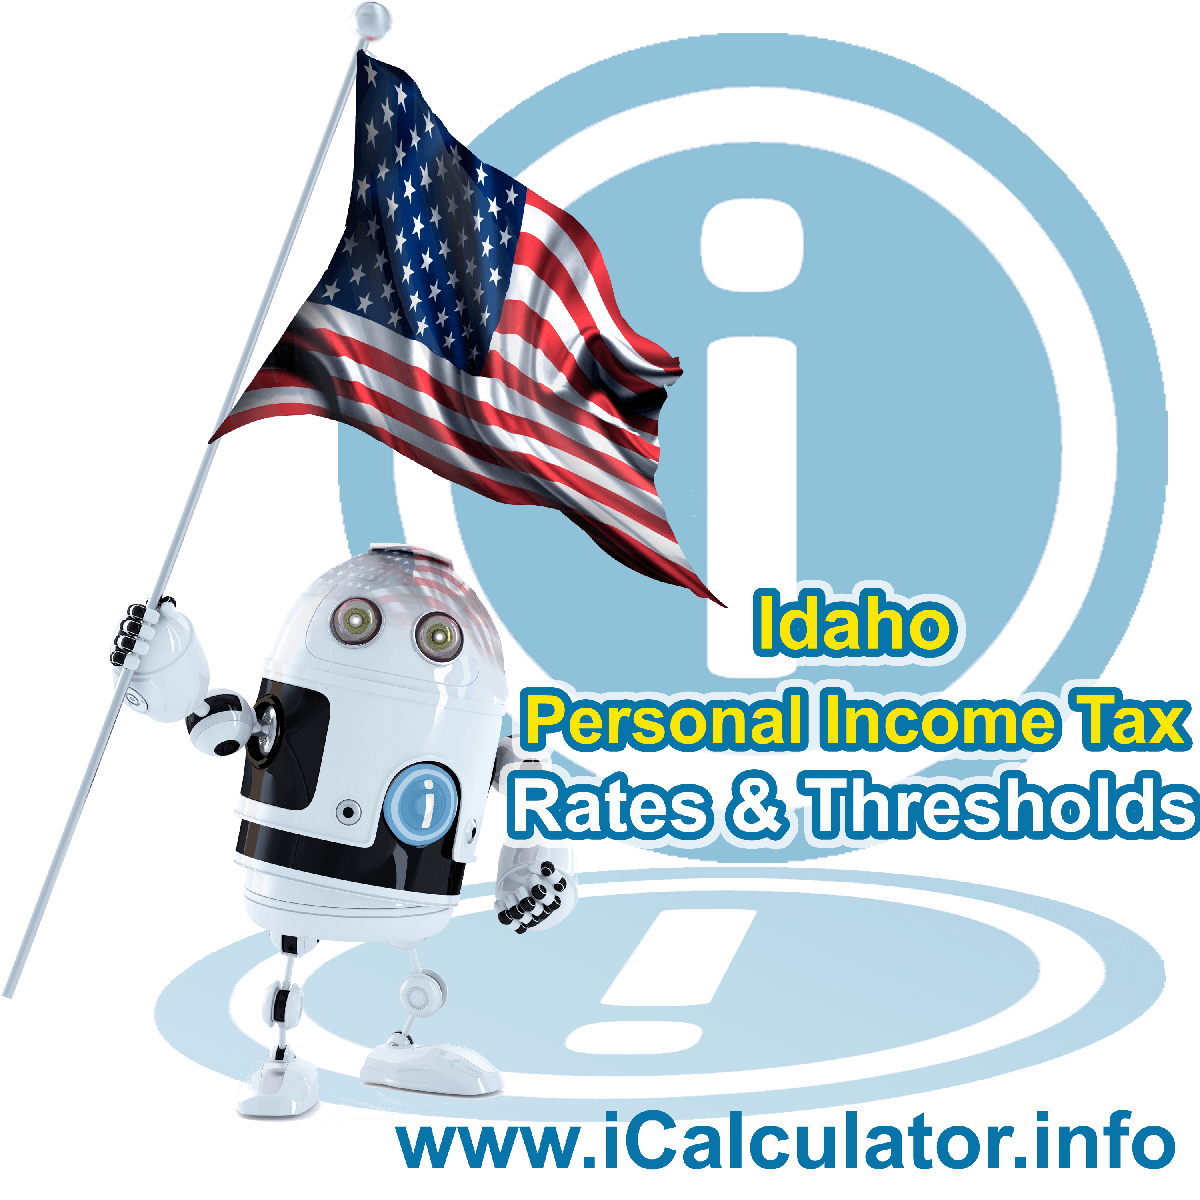 Idaho State Tax Tables 2020. This image displays details of the Idaho State Tax Tables for the 2020 tax return year which is provided in support of the 2020 US Tax Calculator